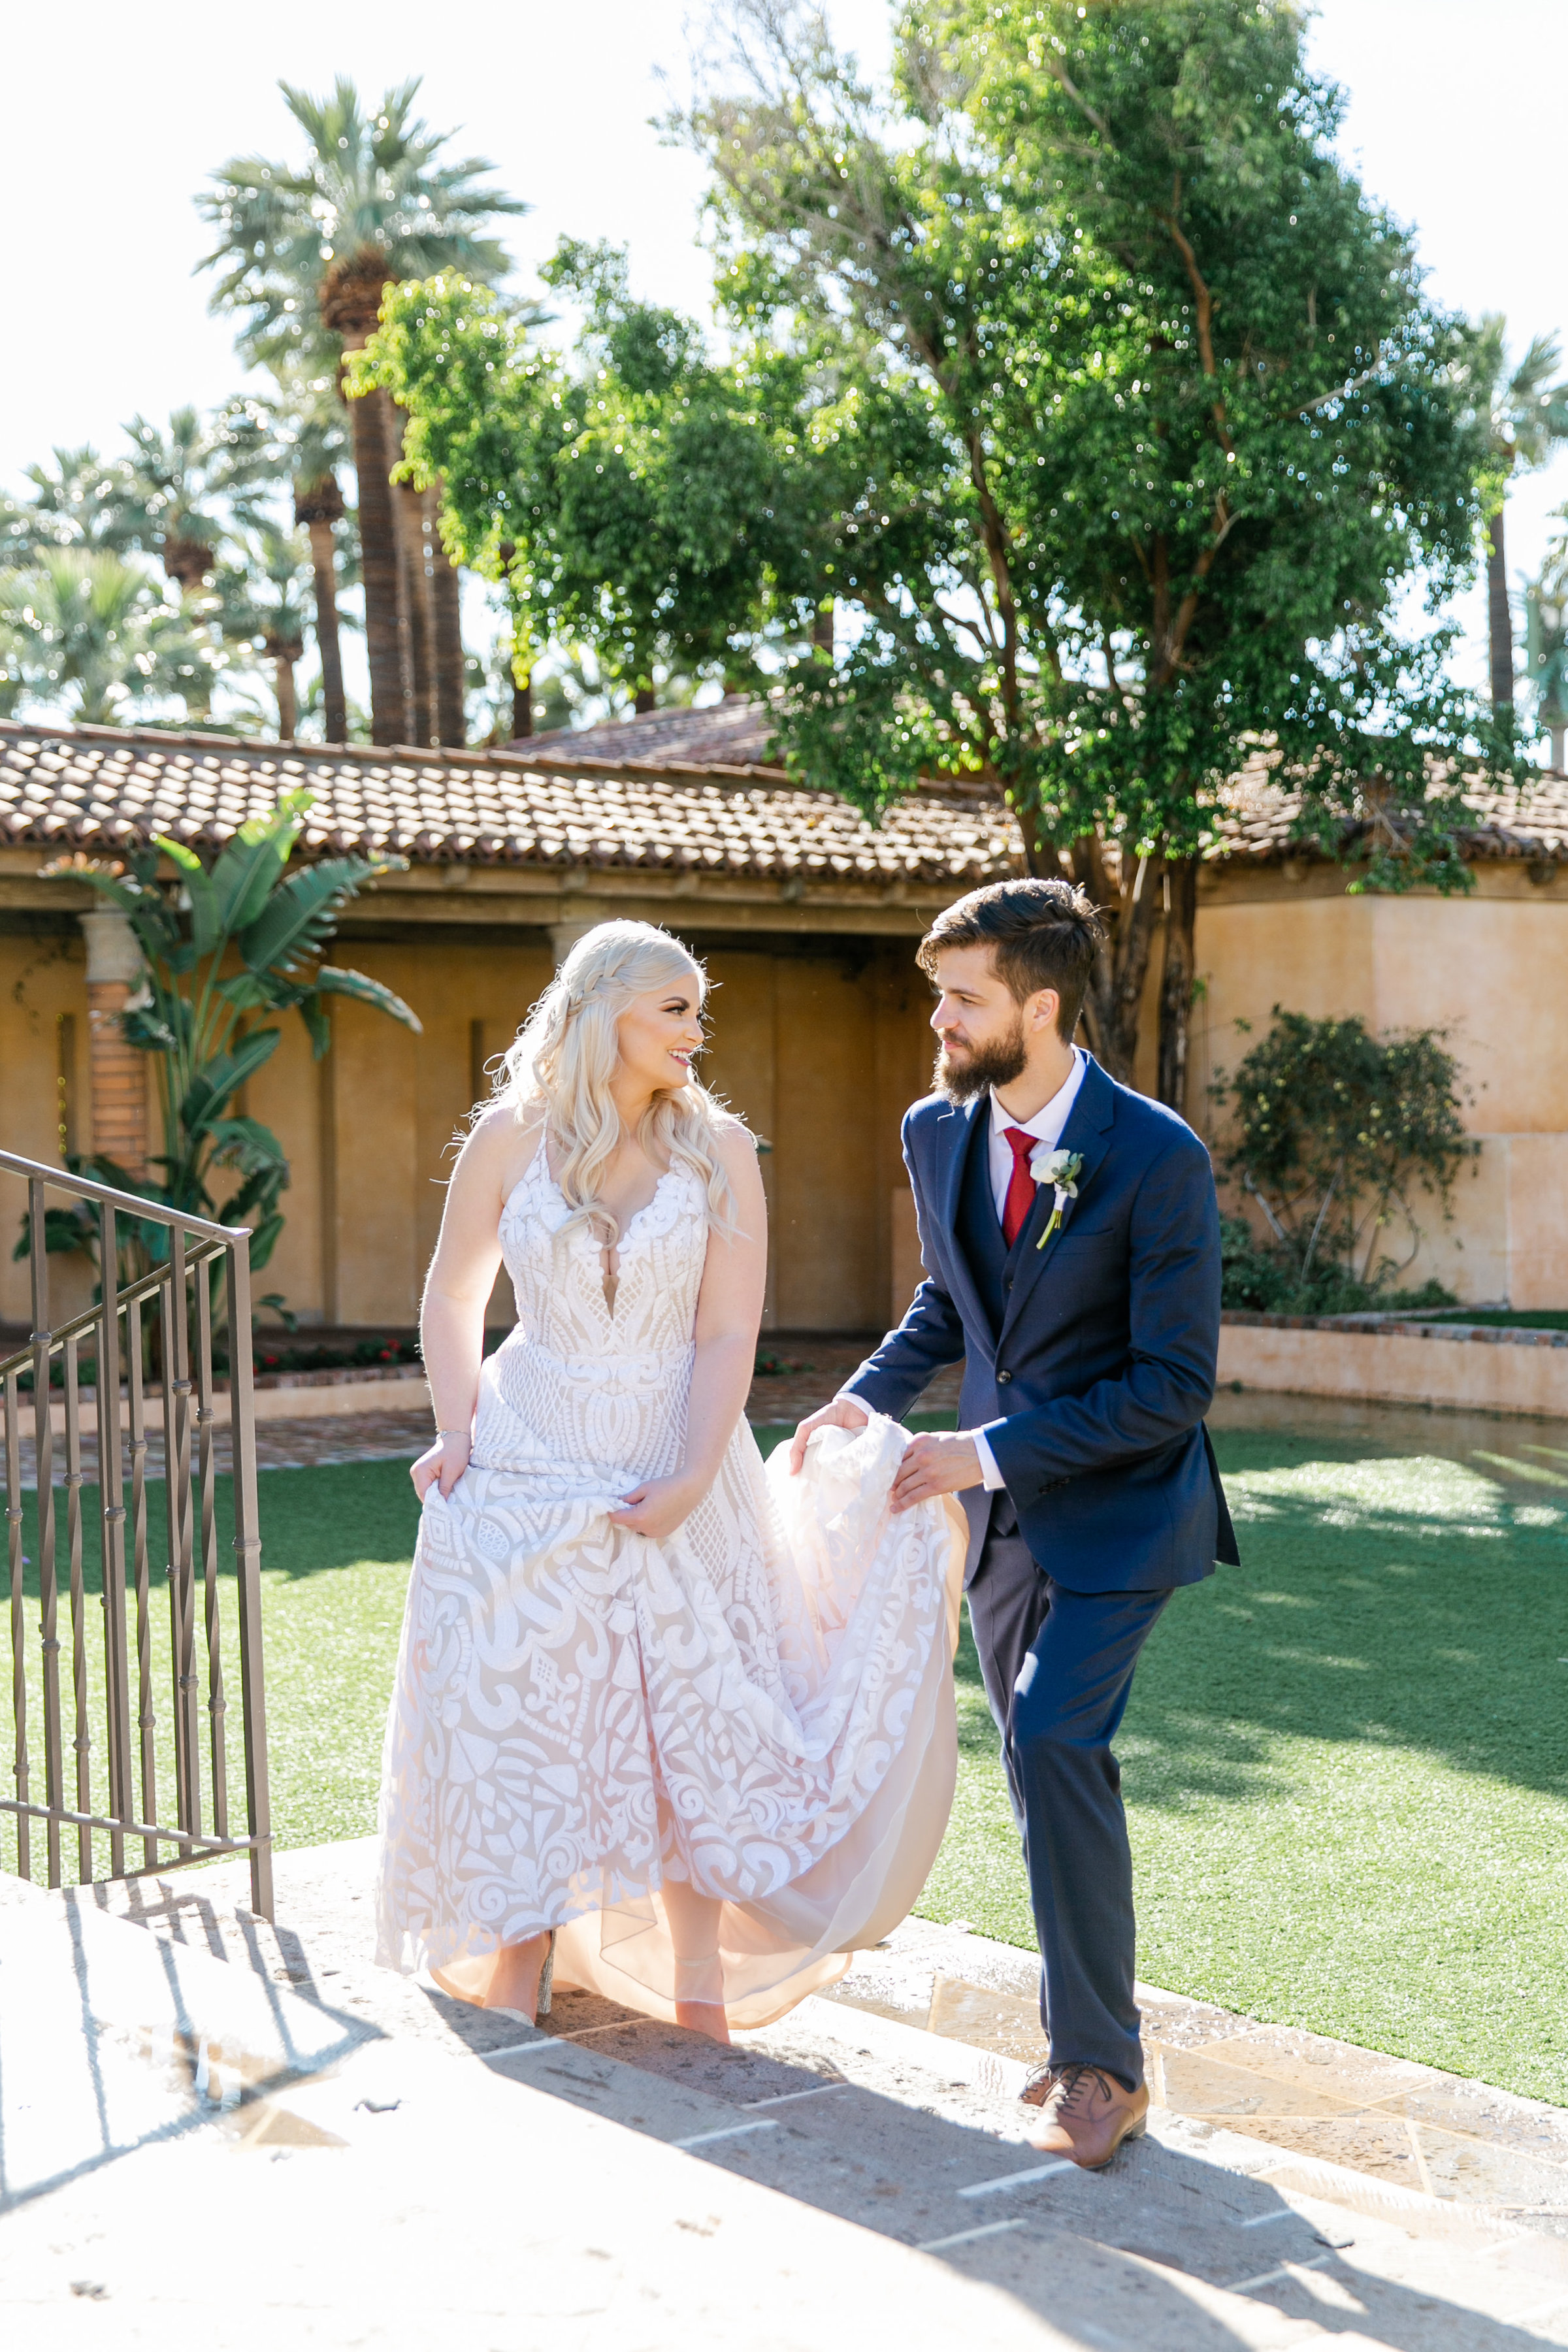 Karlie Colleen Photography - The Royal Palms Wedding - Some Like It Classic - Alex & Sam-175